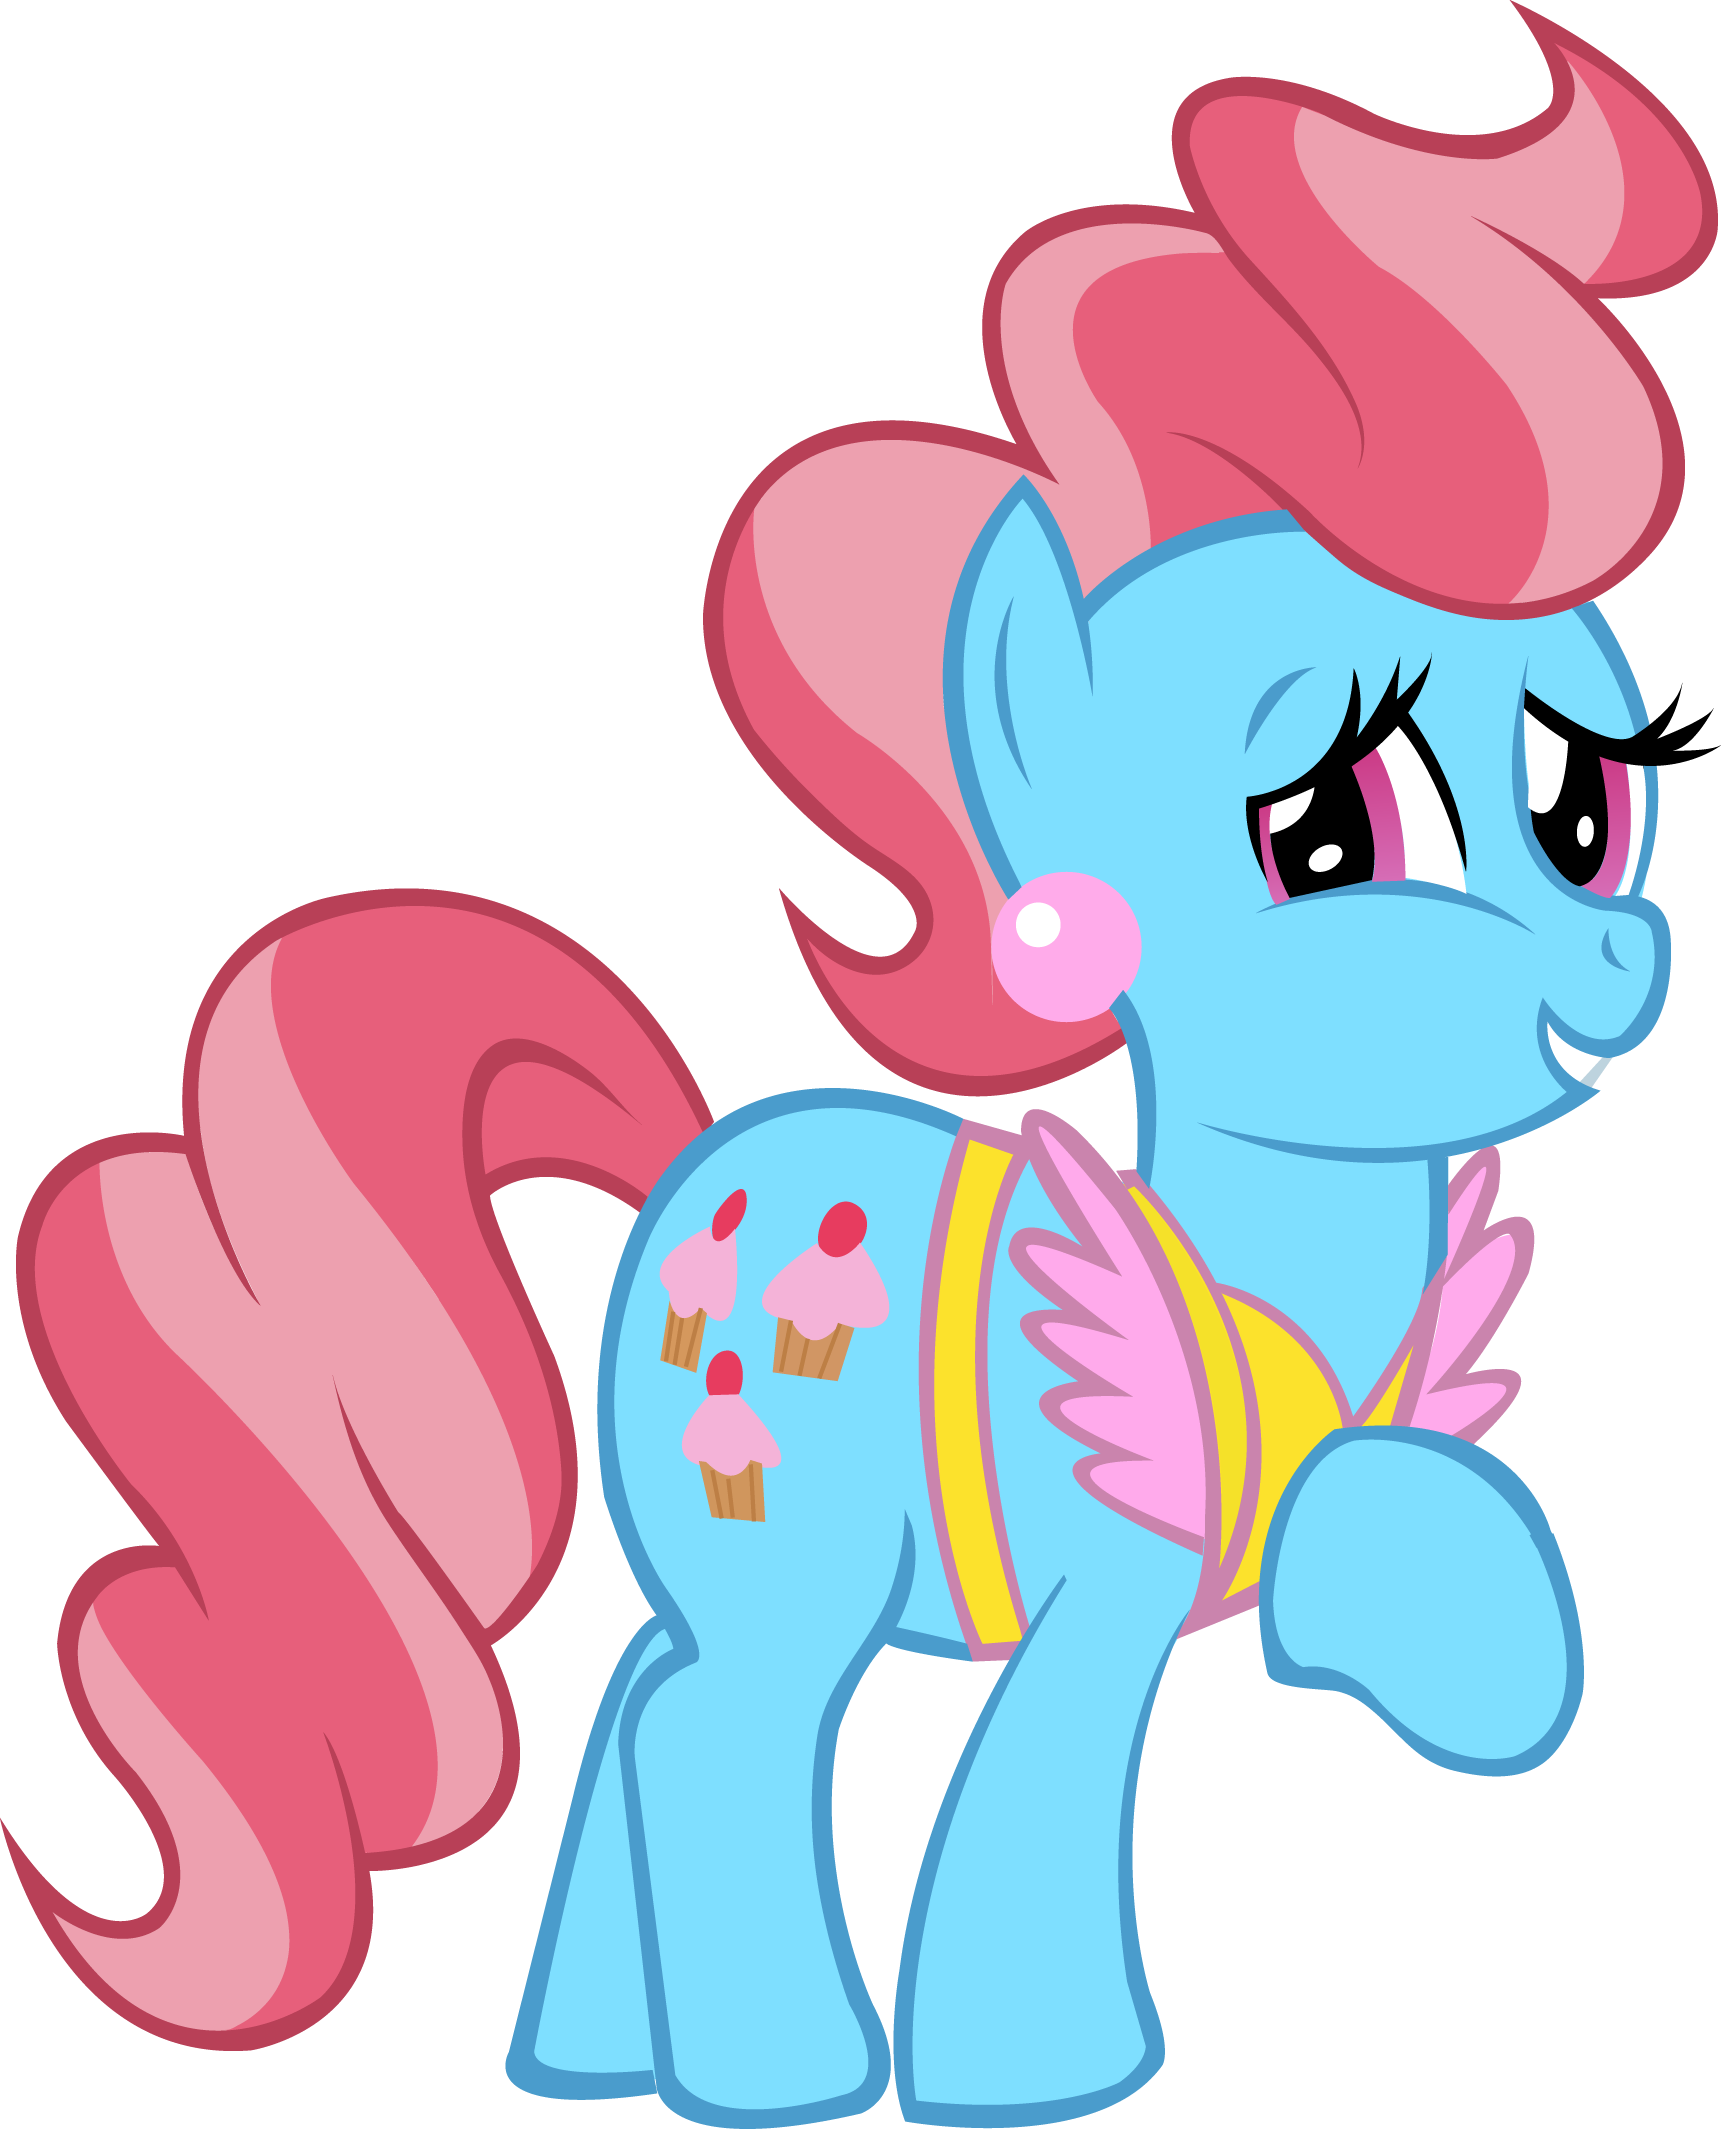 mrs__cake_vector_by_icantunloveyou-d5hwy62.png